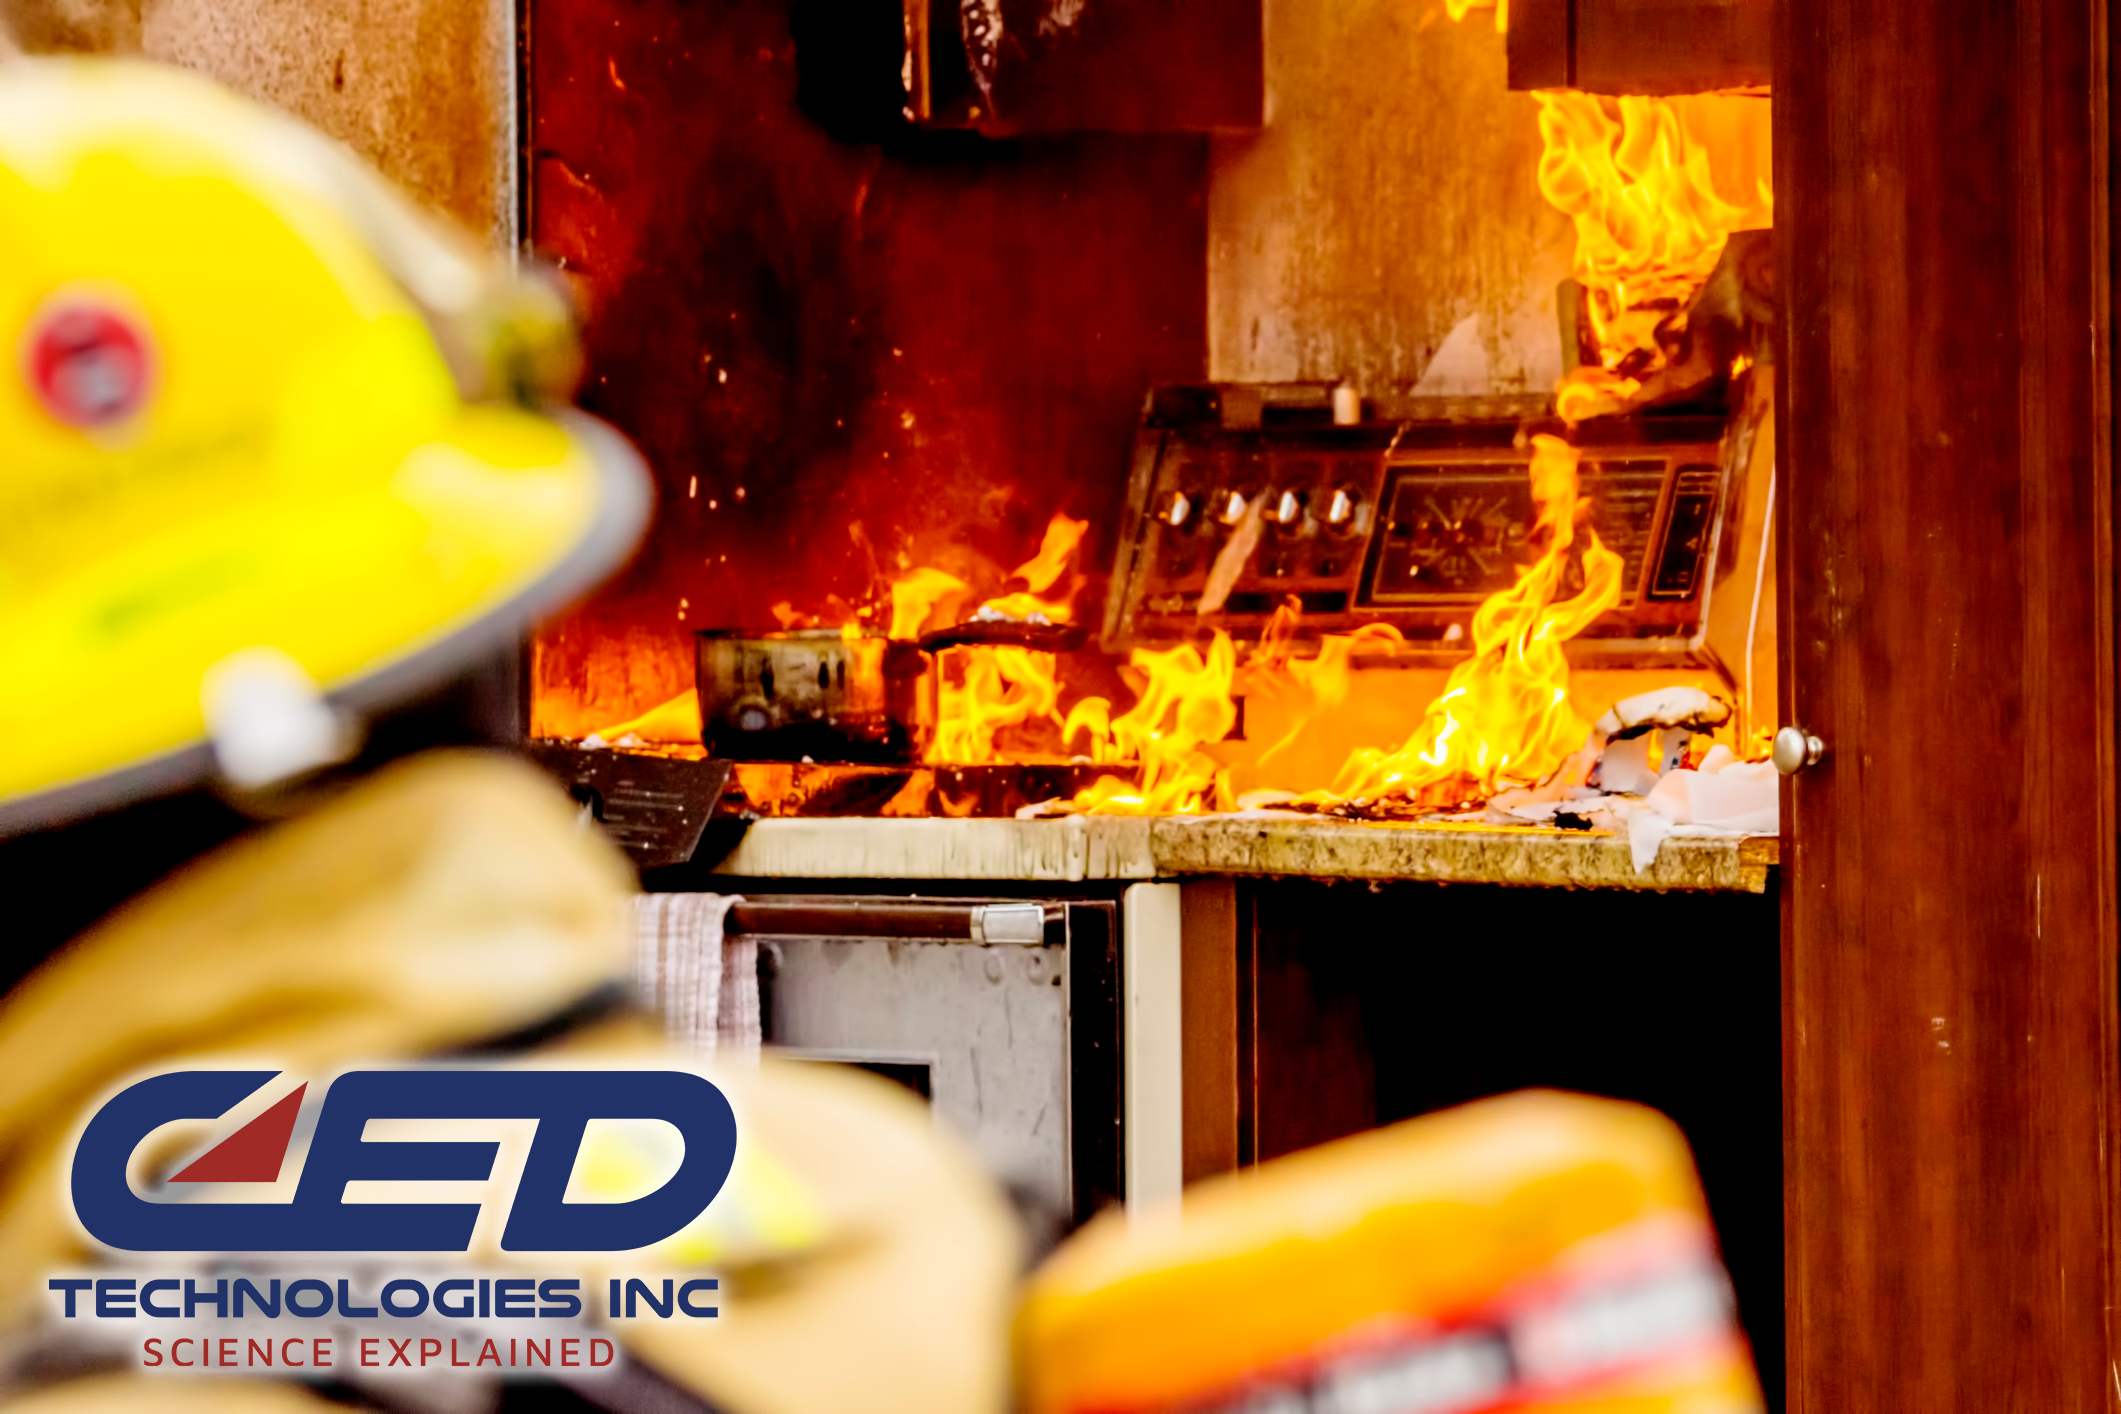 Keeping It Cool in the Kitchen: Cooking Fire Safety